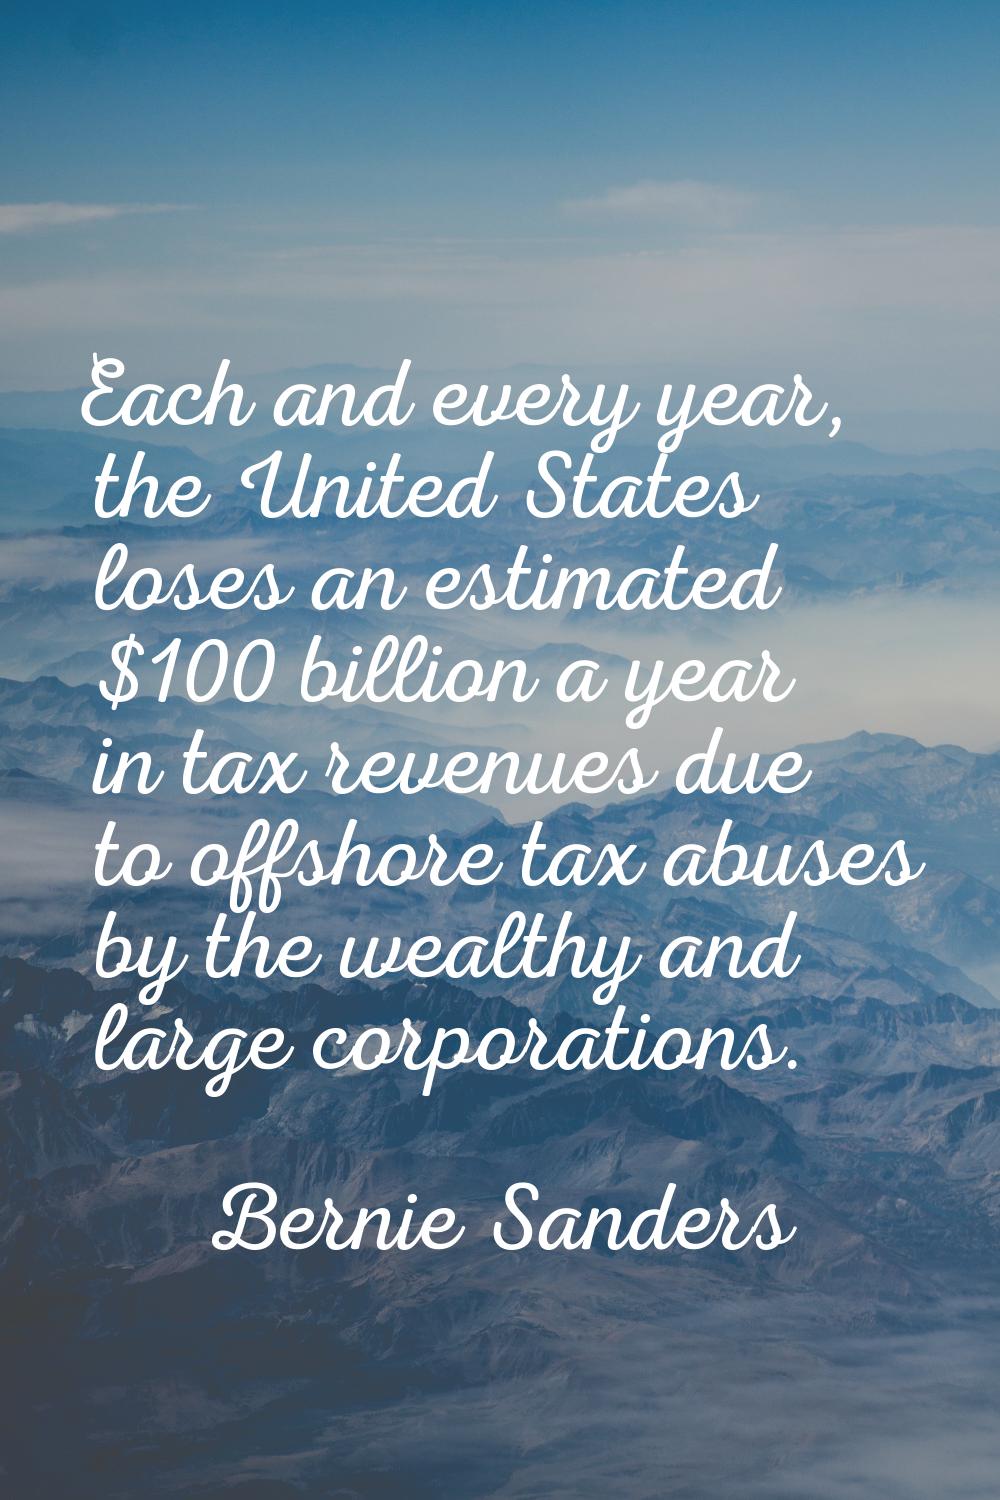 Each and every year, the United States loses an estimated $100 billion a year in tax revenues due t